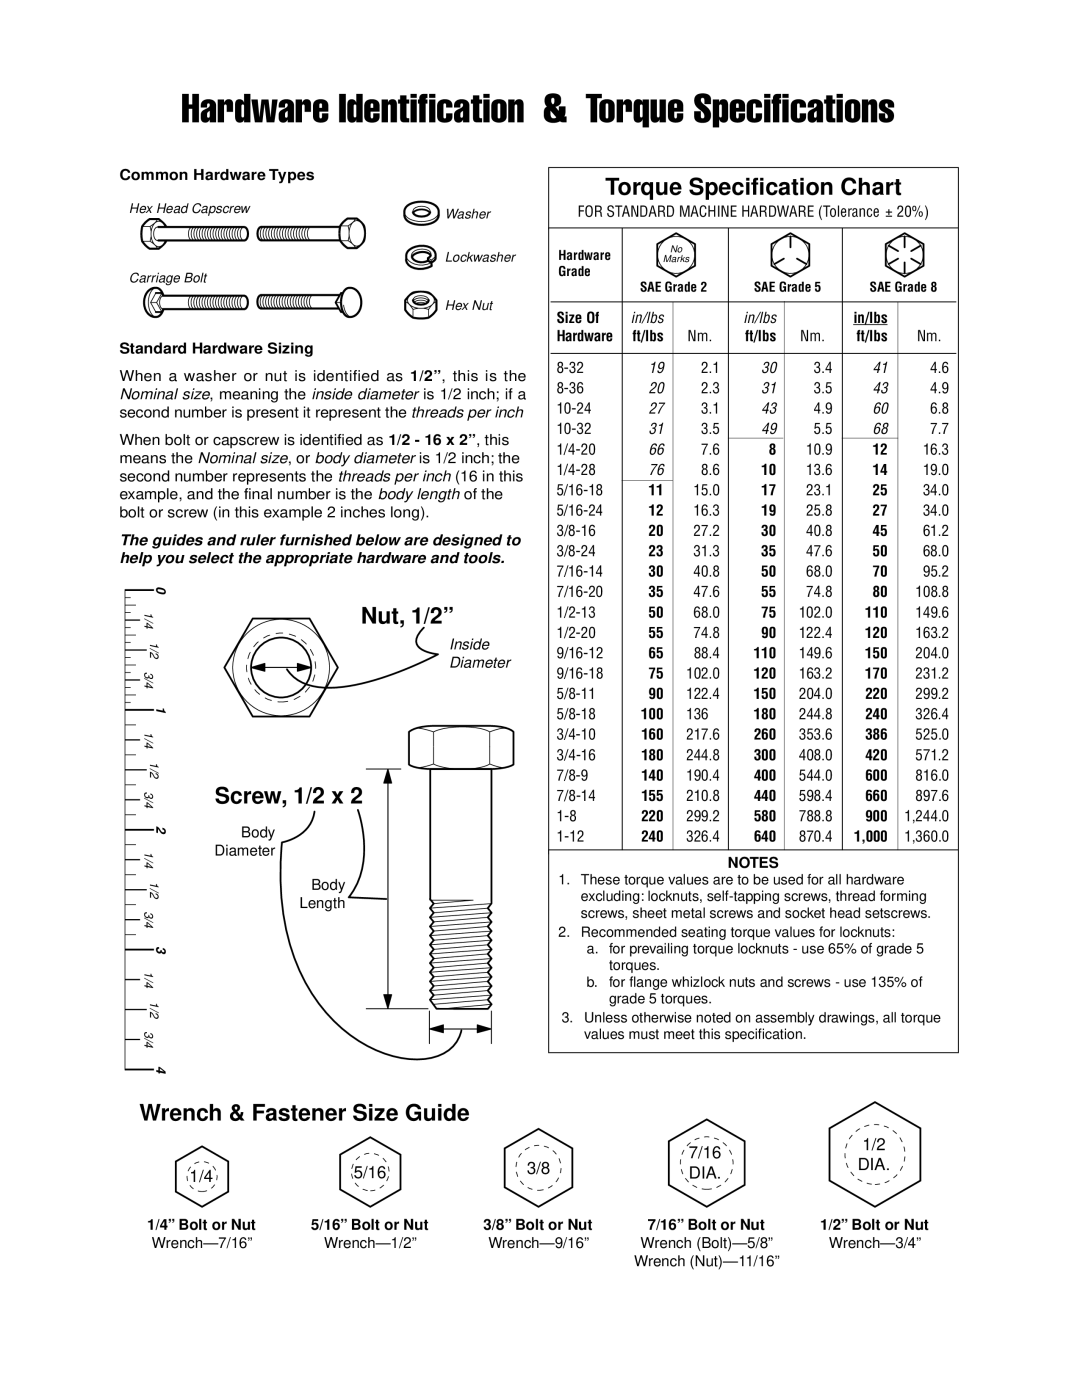 Snapper 4787 Wrench & Fastener Size Guide, Hardware Identification & Torque Specifications, Torque Specification Chart 